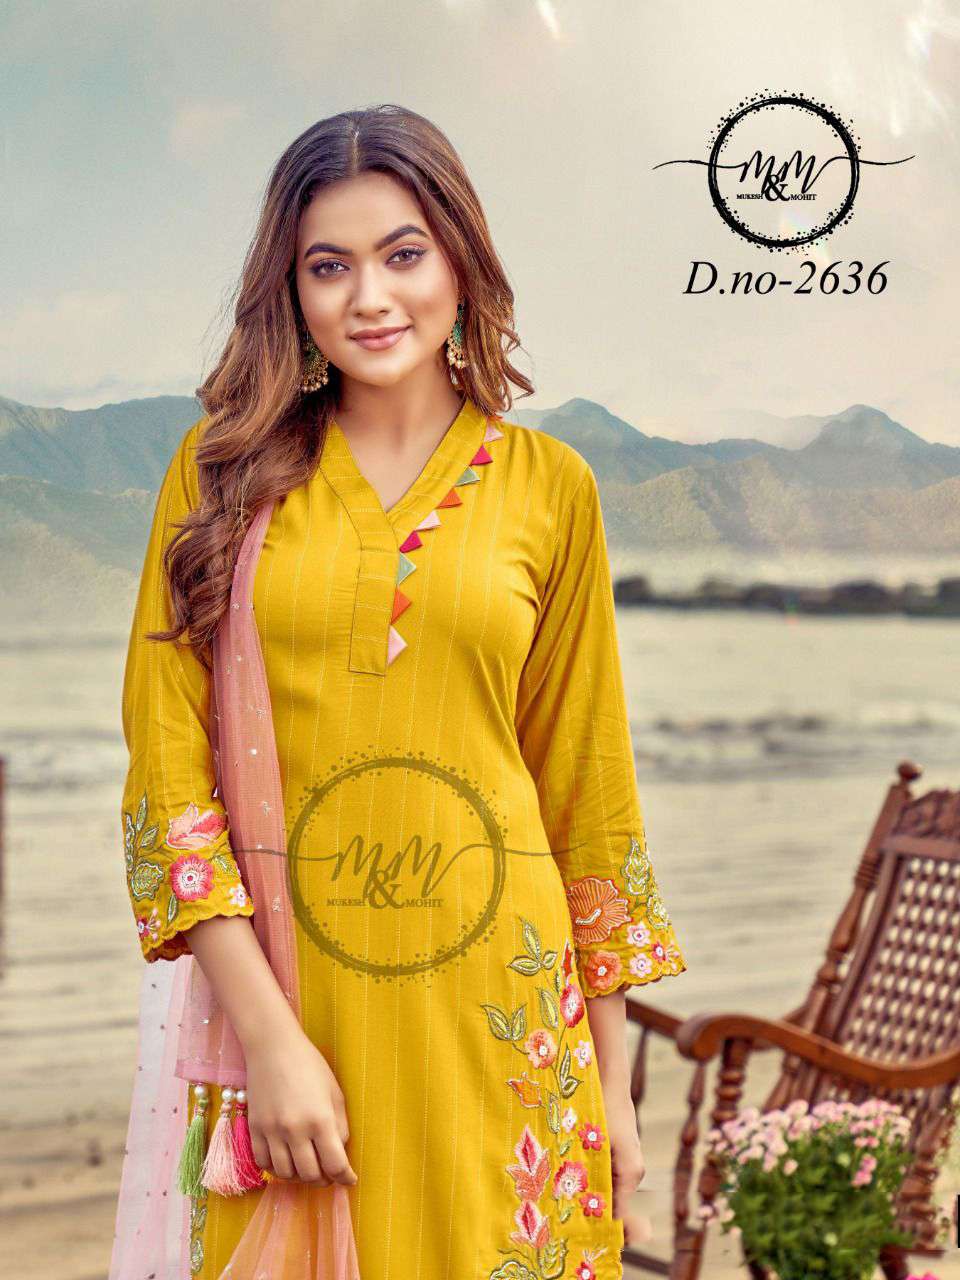 Your Guide to the Best Kurtis in Ahmedabad Also 10 Classy Recommended  Kurtis That Perfectly Mix Tradition and Fashion 2020